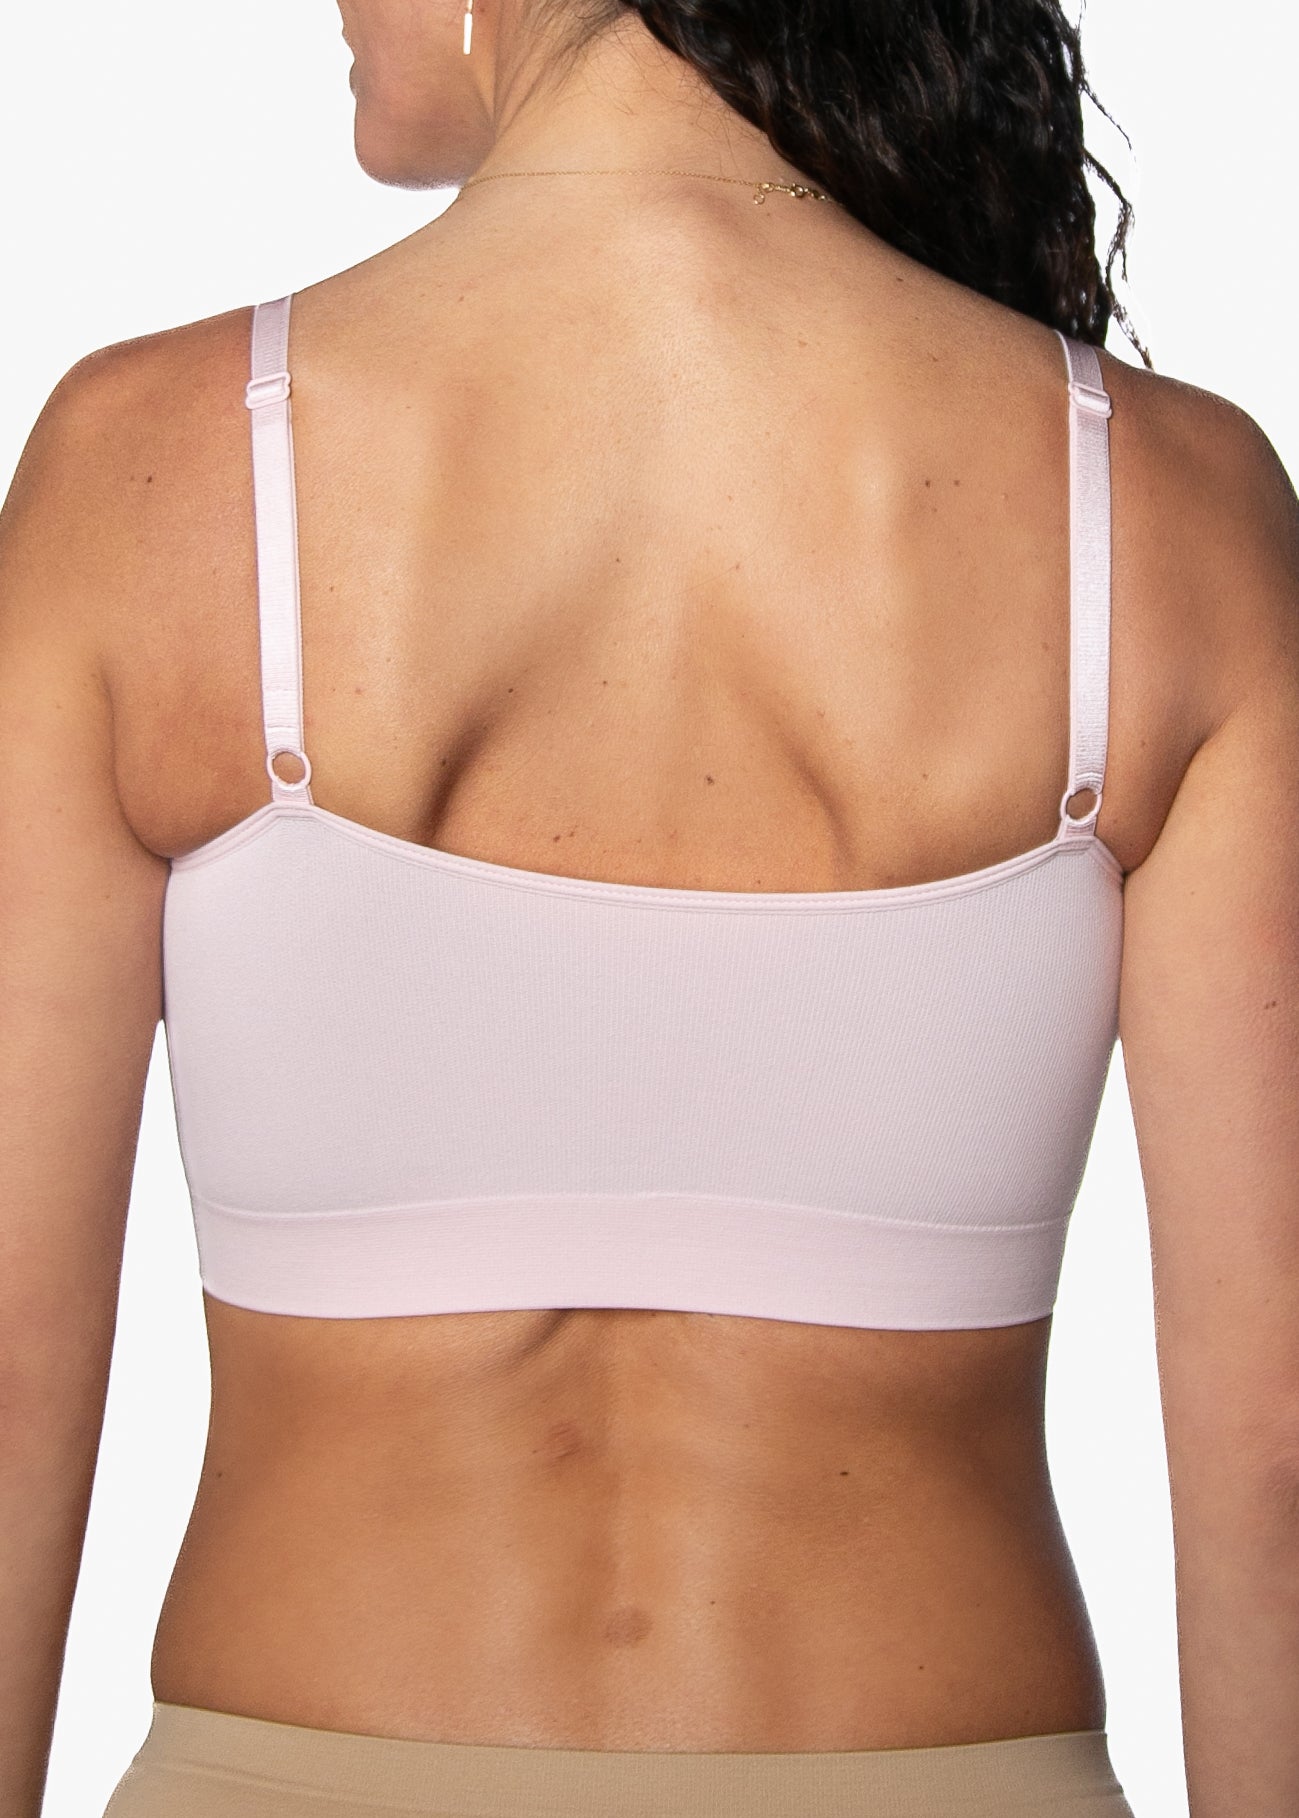 Wholesale bra adjustable hook For All Your Intimate Needs 